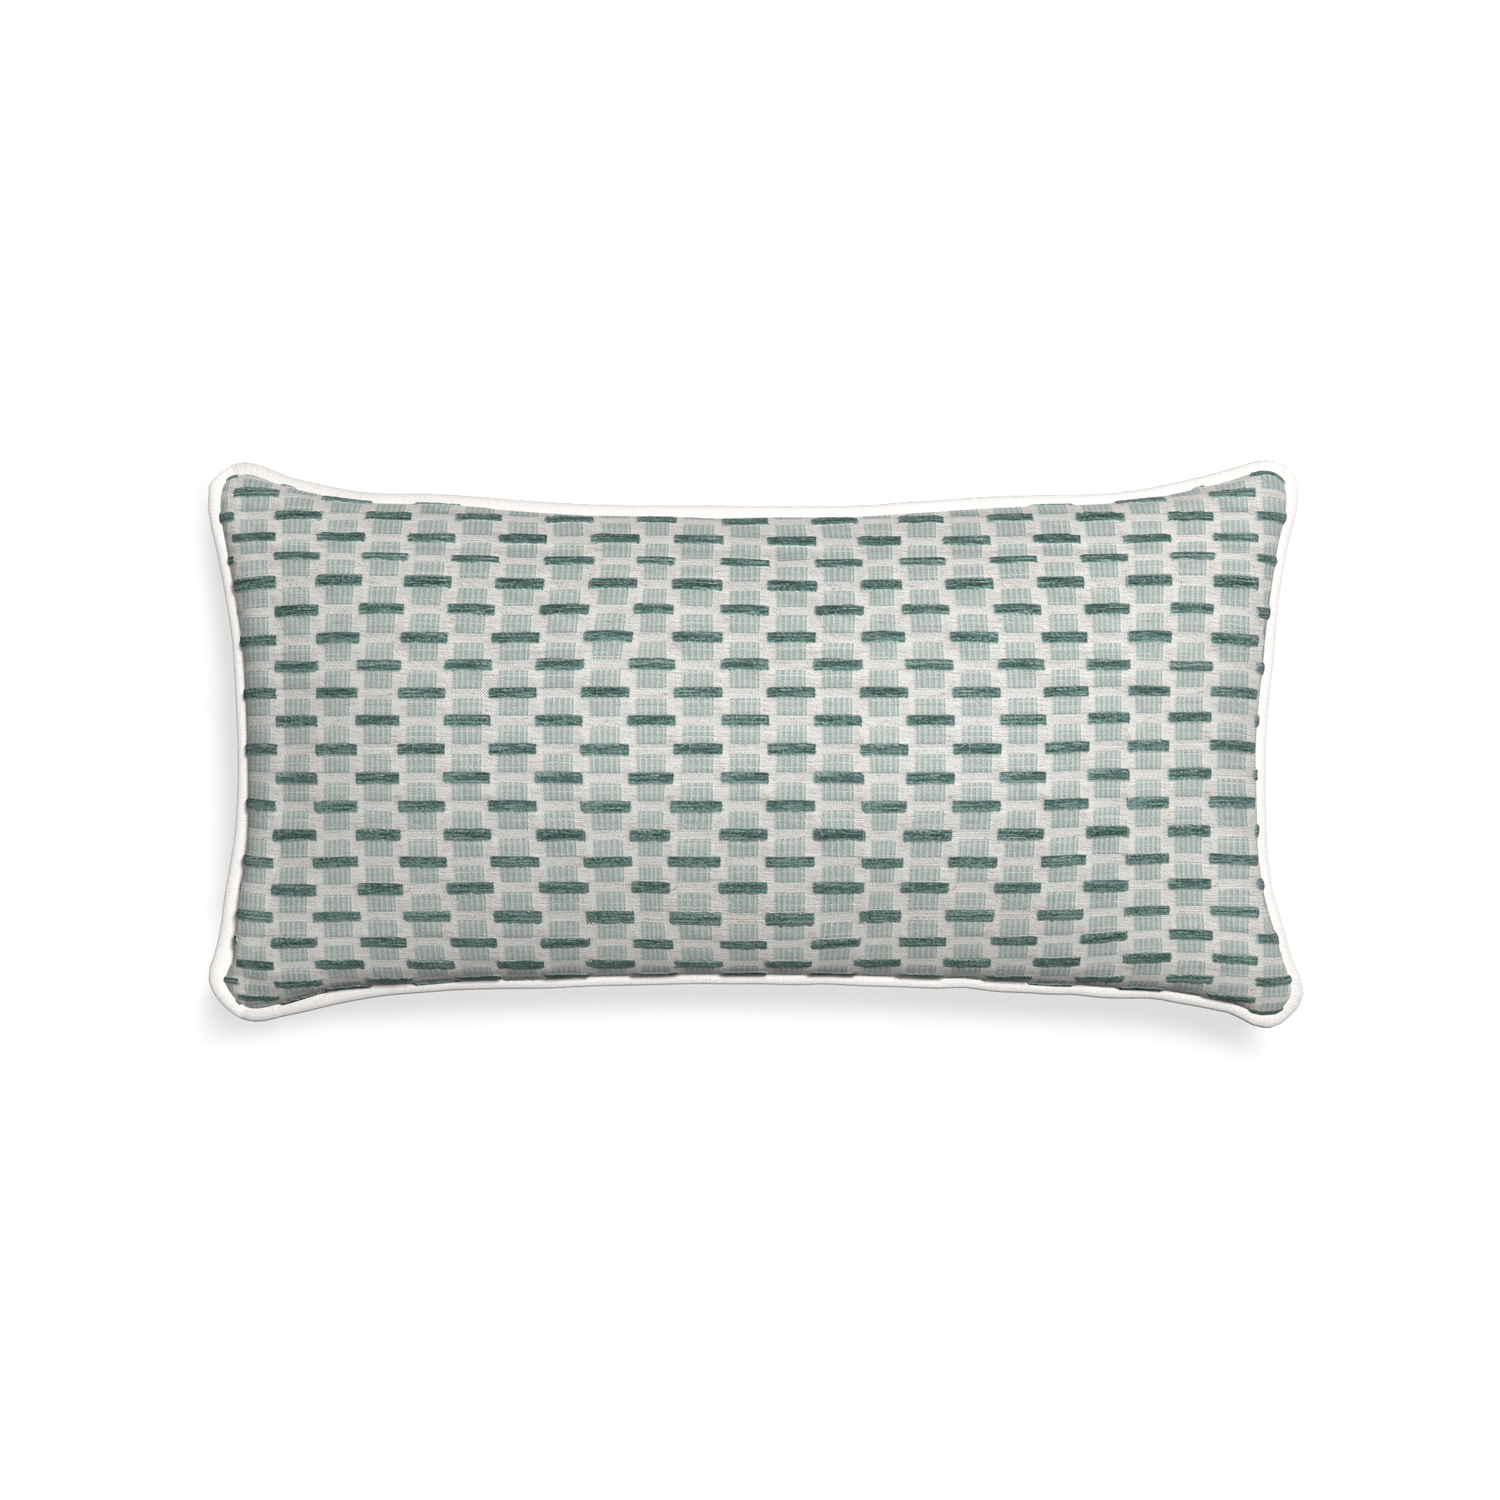 Midi-lumbar willow mint custom green geometric chenillepillow with snow piping on white background